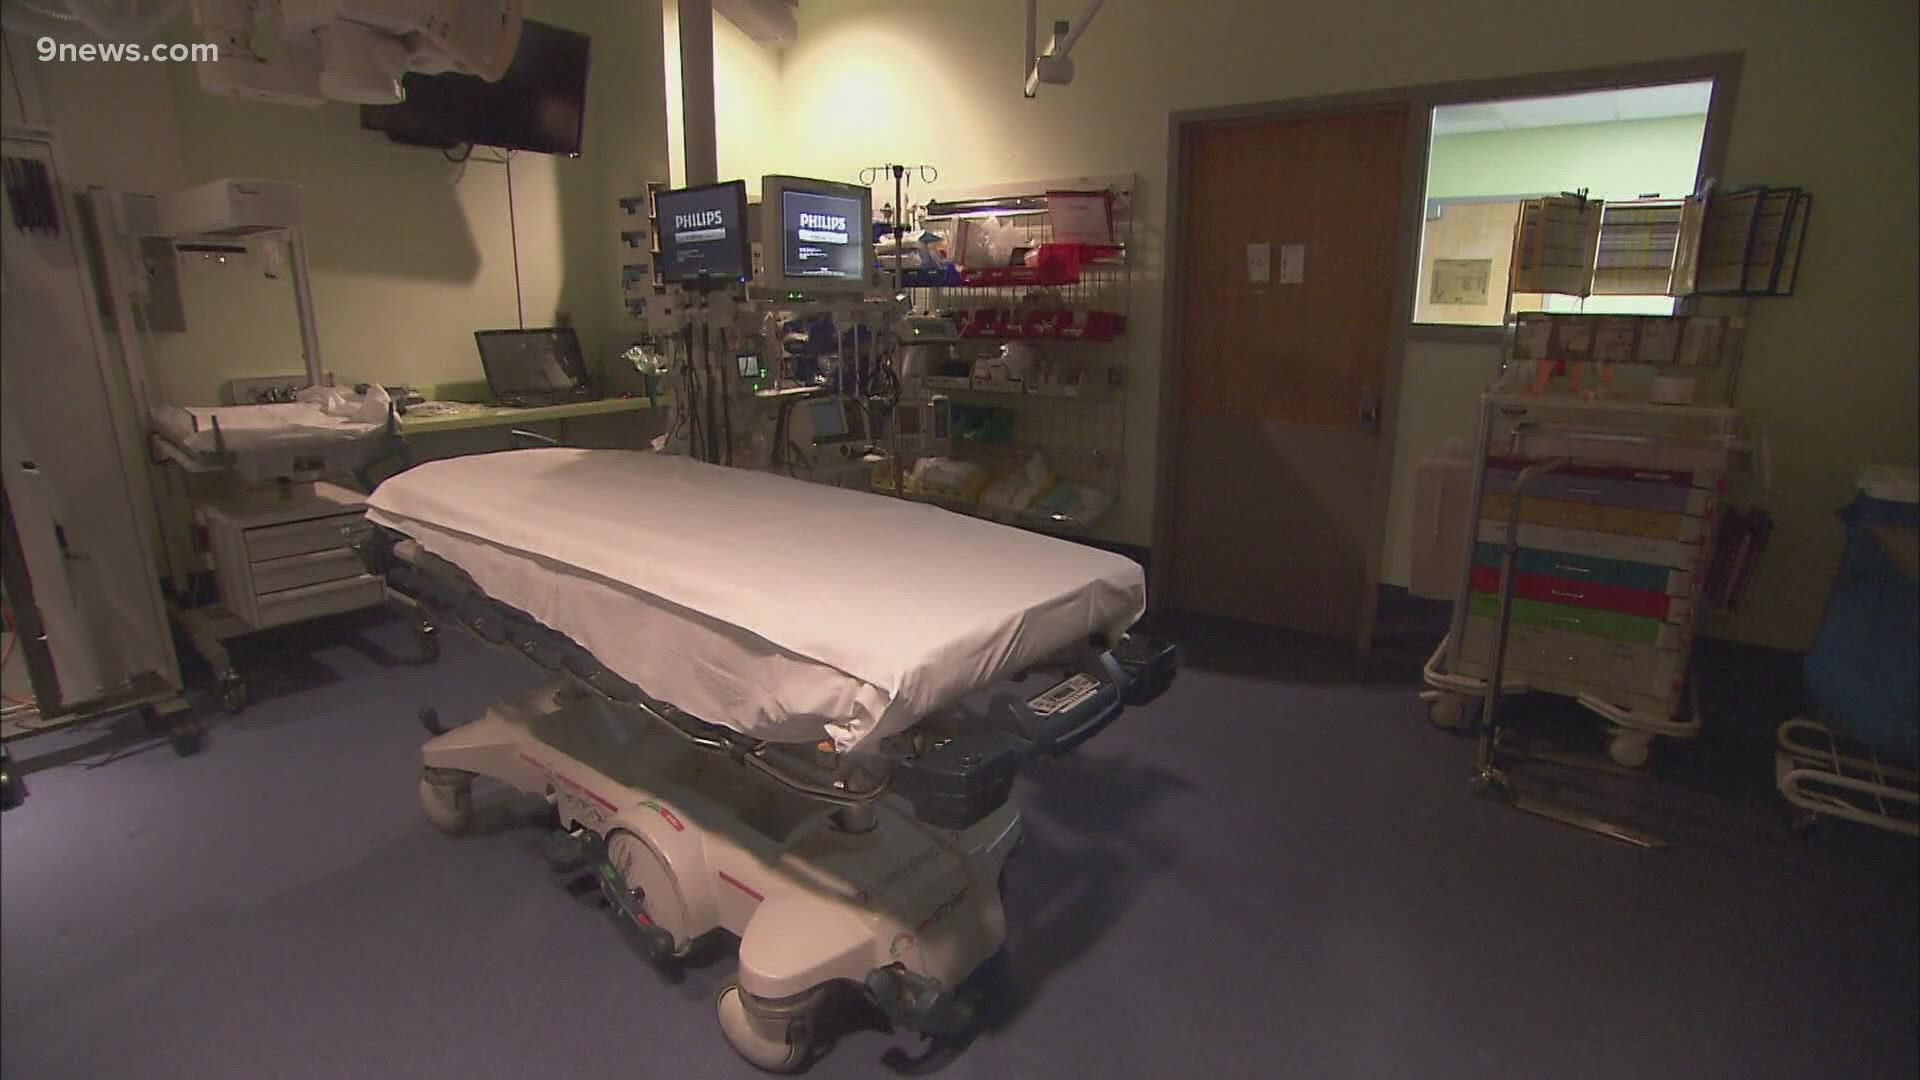 Gov. Jared Polis signed an executive order last week that makes it possible for hospitals to transfer patients to other facilities if they are at or near capacity.